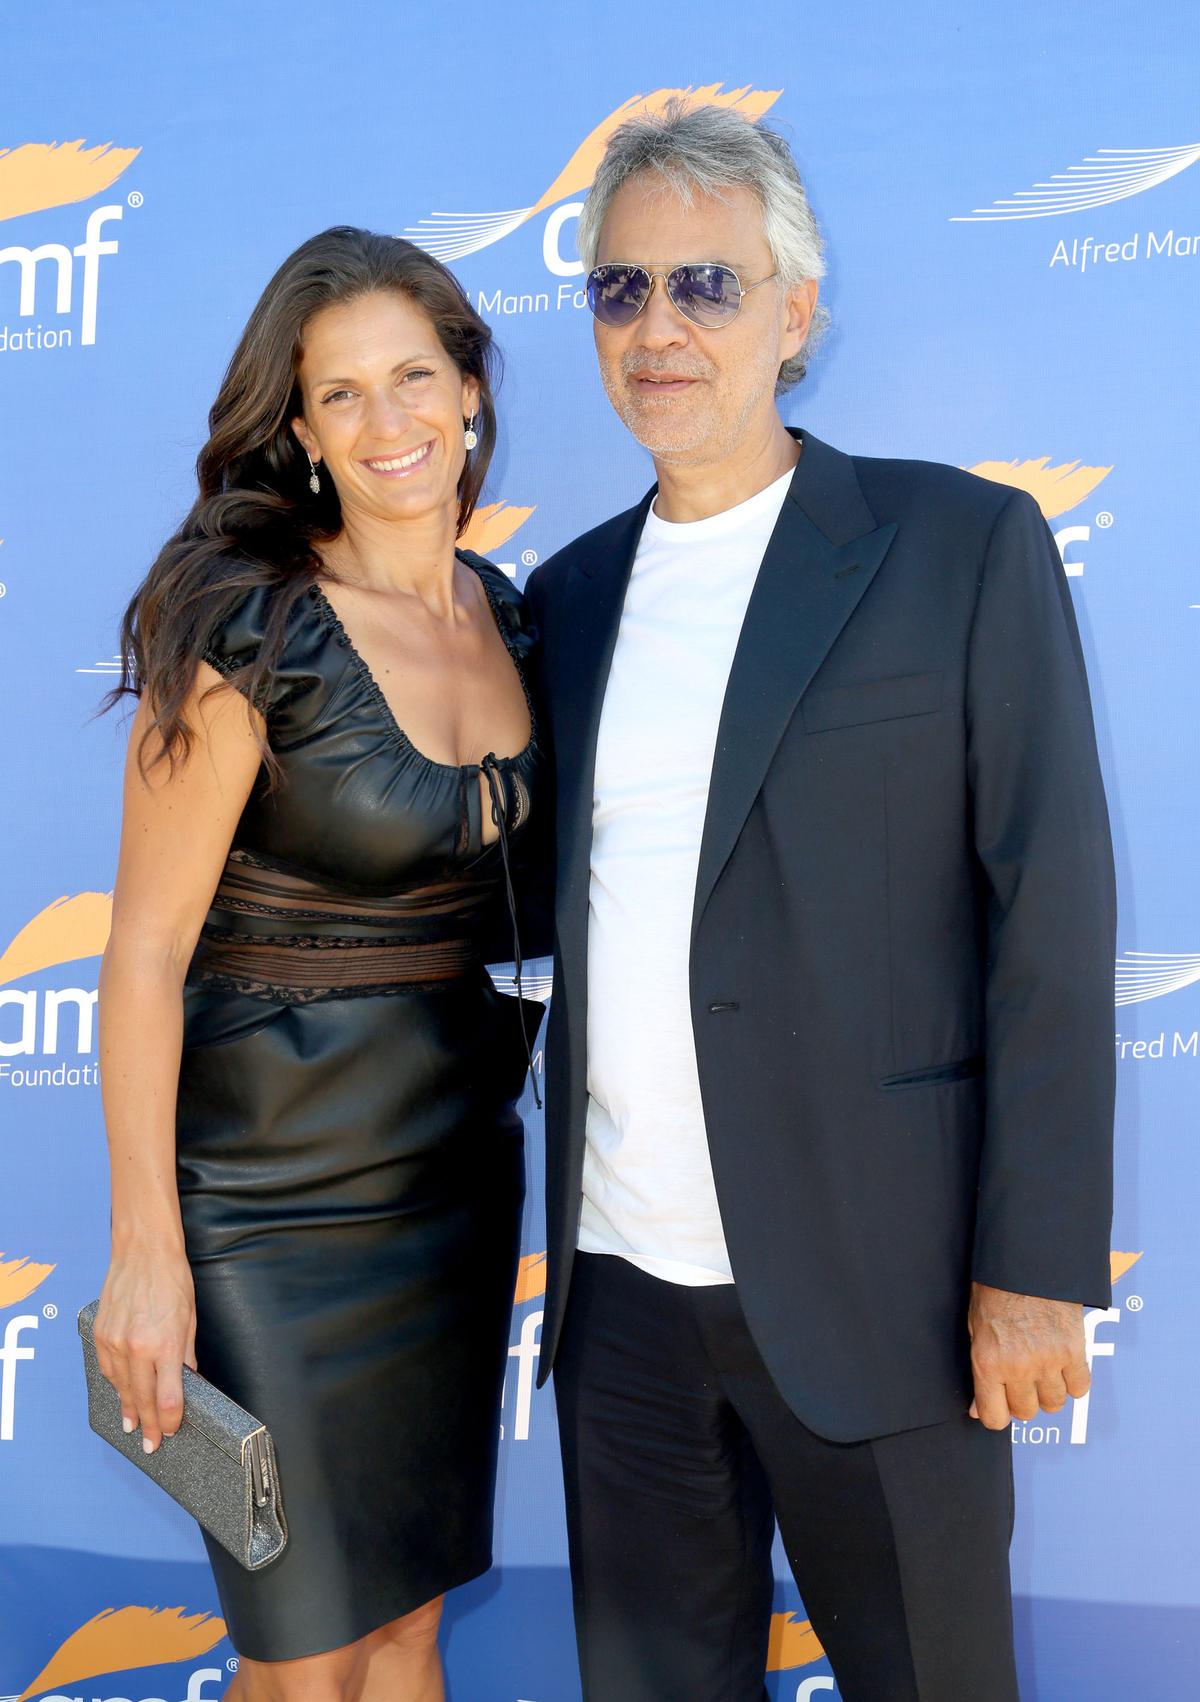 Bocelli and his wife, Veronica, attend Alfred Mann Foundation's "An Evening Under The Stars with Andrea Bocelli" in Los Angeles on June 8, 2015. (©Getty Images | <a href="https://www.gettyimages.com/detail/news-photo/andrea-bocelli-and-wife-veronica-berti-attend-alfred-mann-news-photo/476427220?adppopup=true">Rachel Murray</a>)